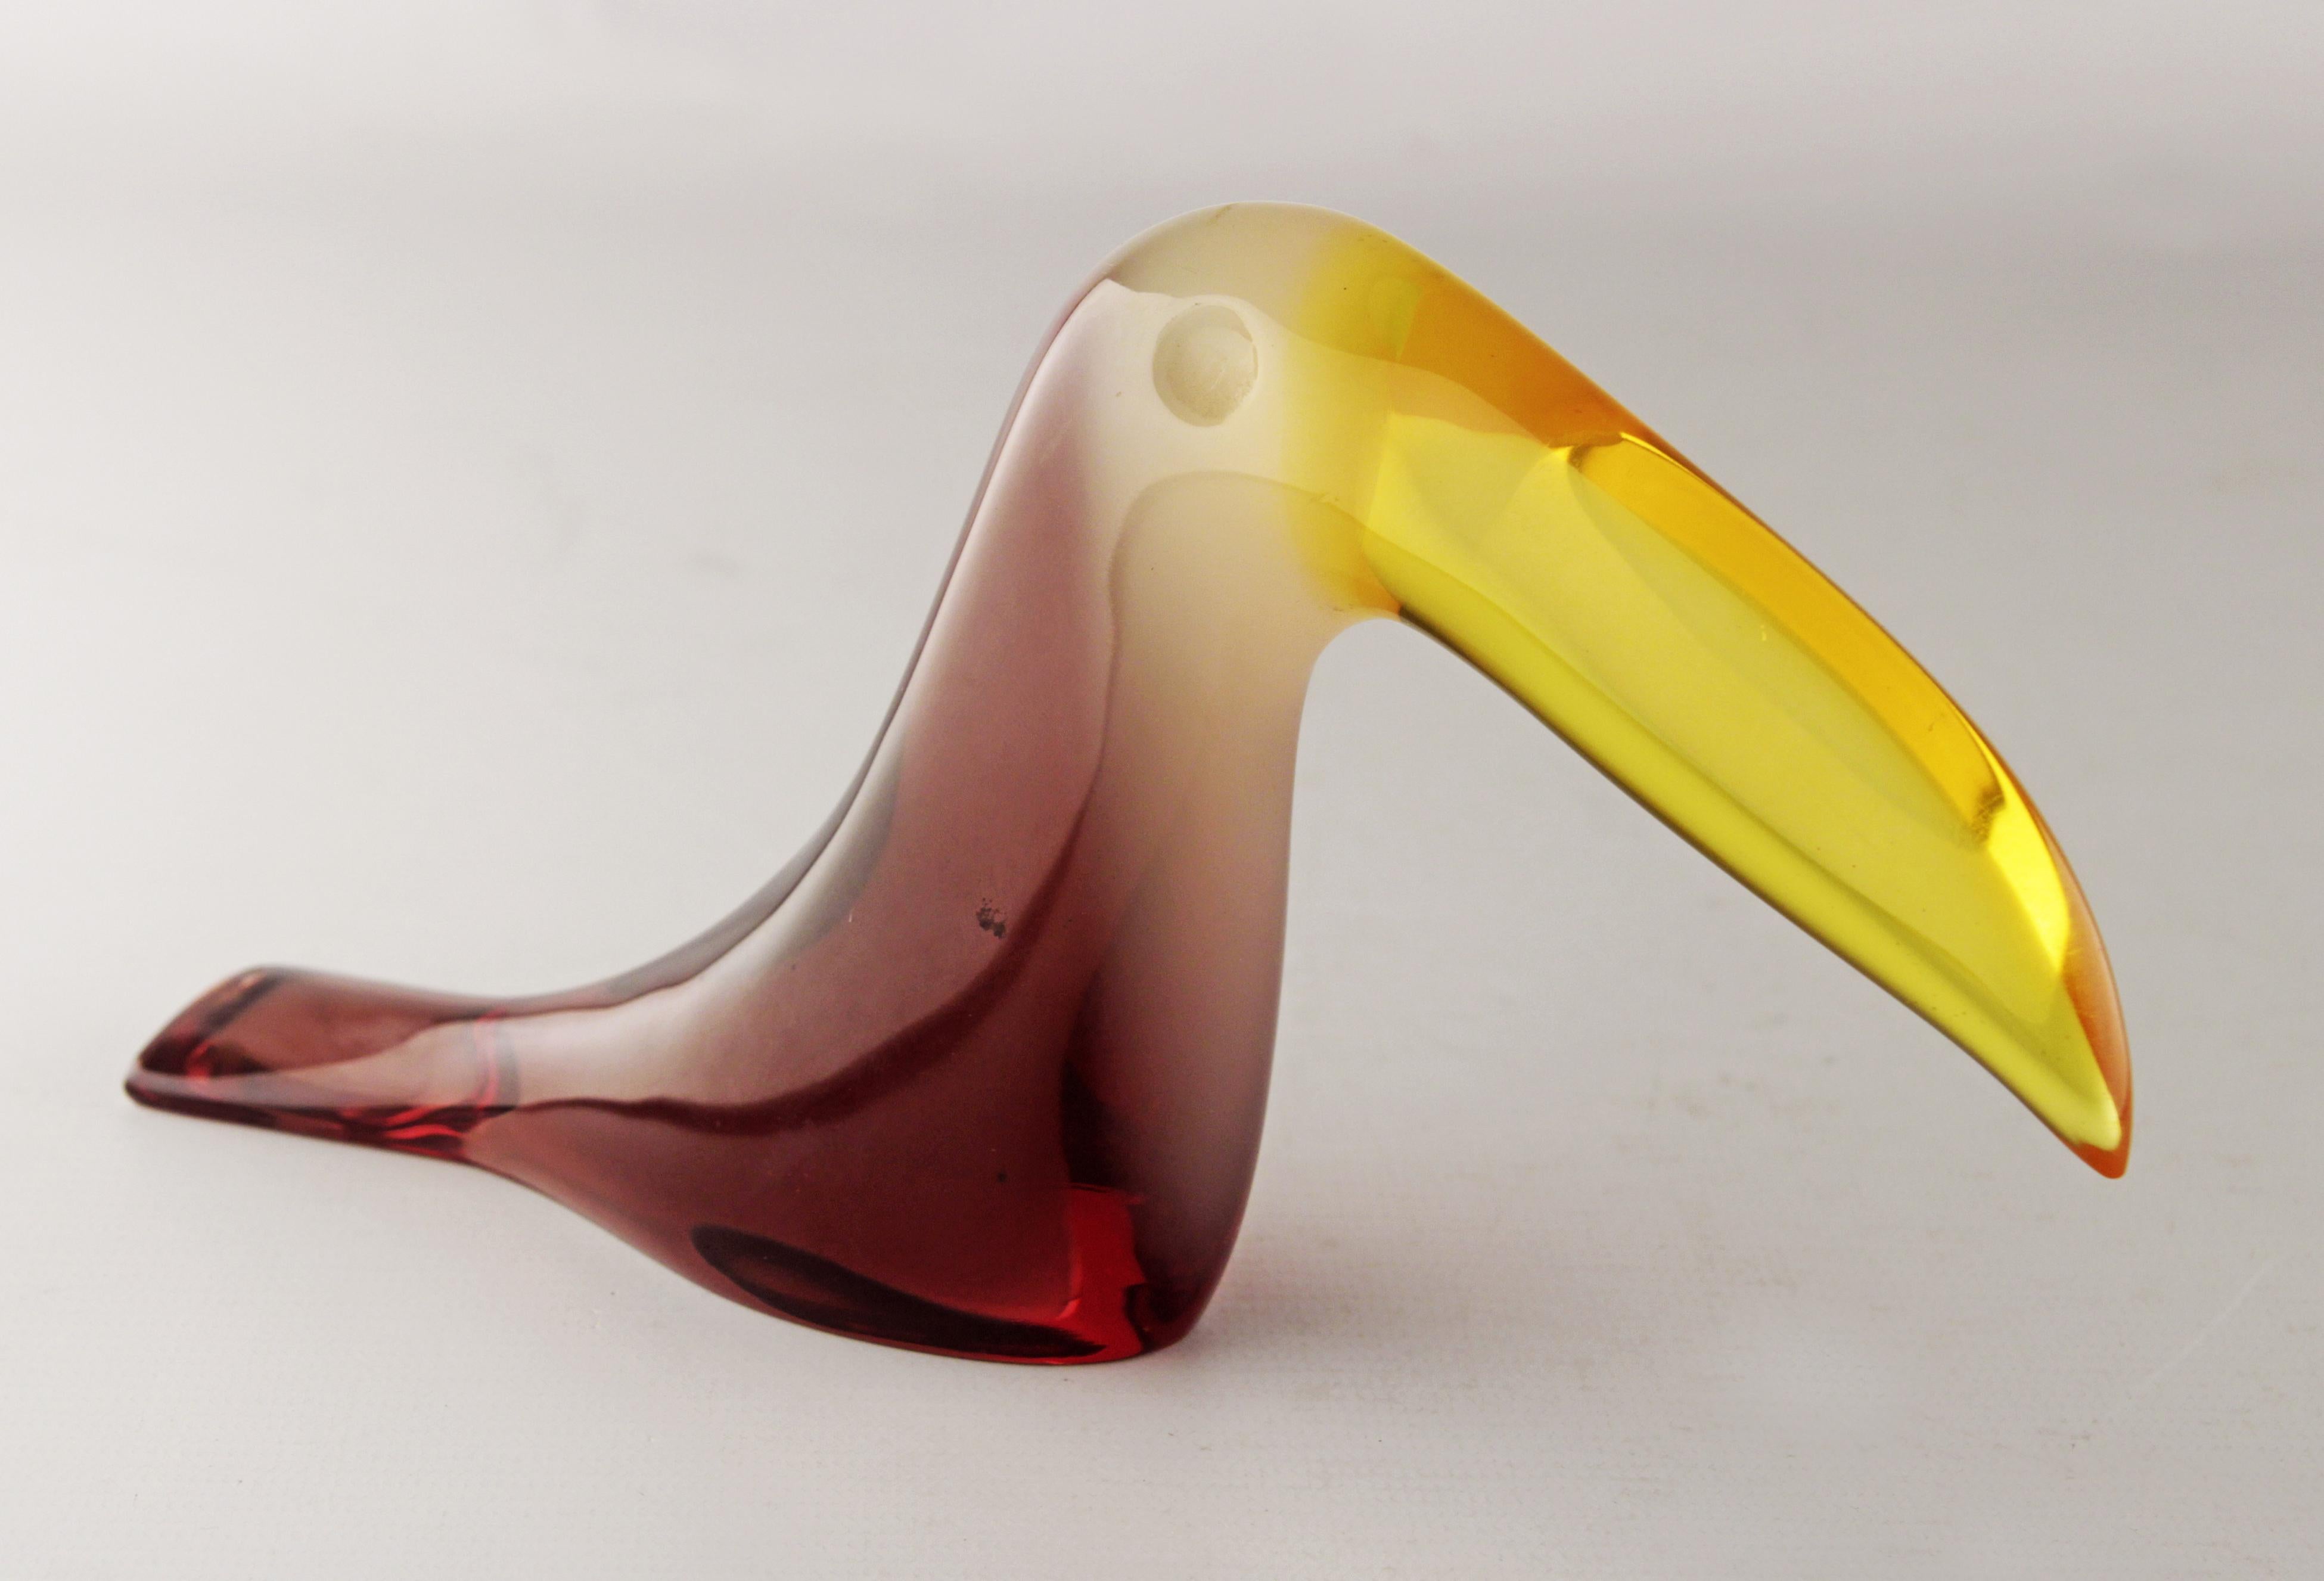 Mid-20th century brazilian translucent acrylic/lucite toucan sculpture by author Abraham Palatnik

By: Abraham Palatnik
Material: acrylic, lucite, synthetic, plastic
Technique: cast, molded, polished, hand-crafted
Dimensions: 2 in x 9 in x 4.5